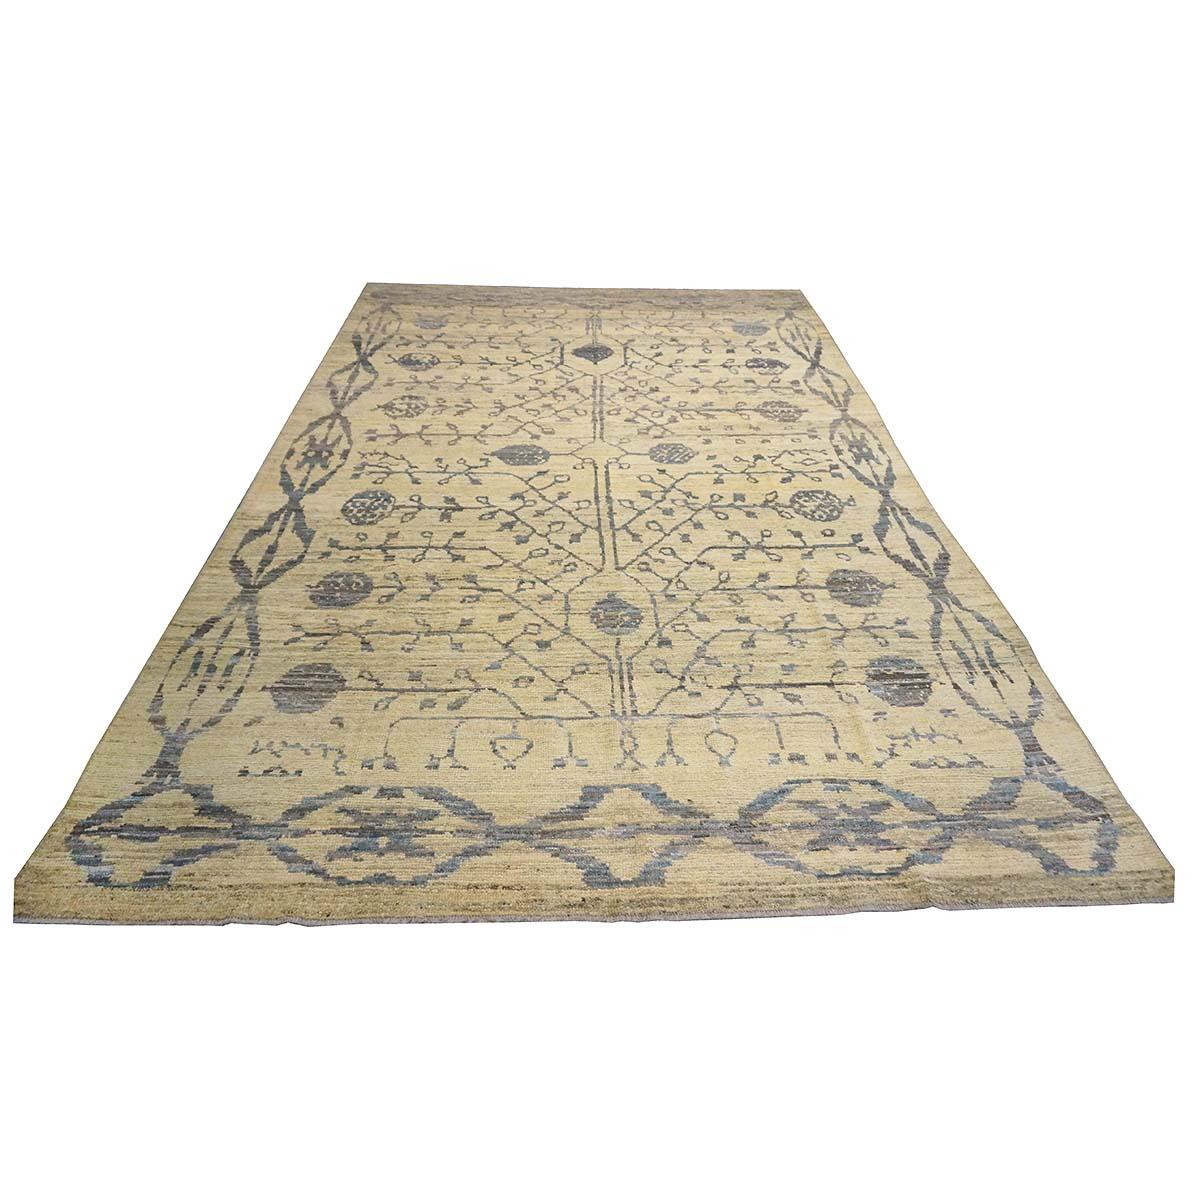 21st Century Turkish Oushak 8x12 Yellow, Blue, & Charcoal Handmade Area Rug In Good Condition For Sale In Houston, TX